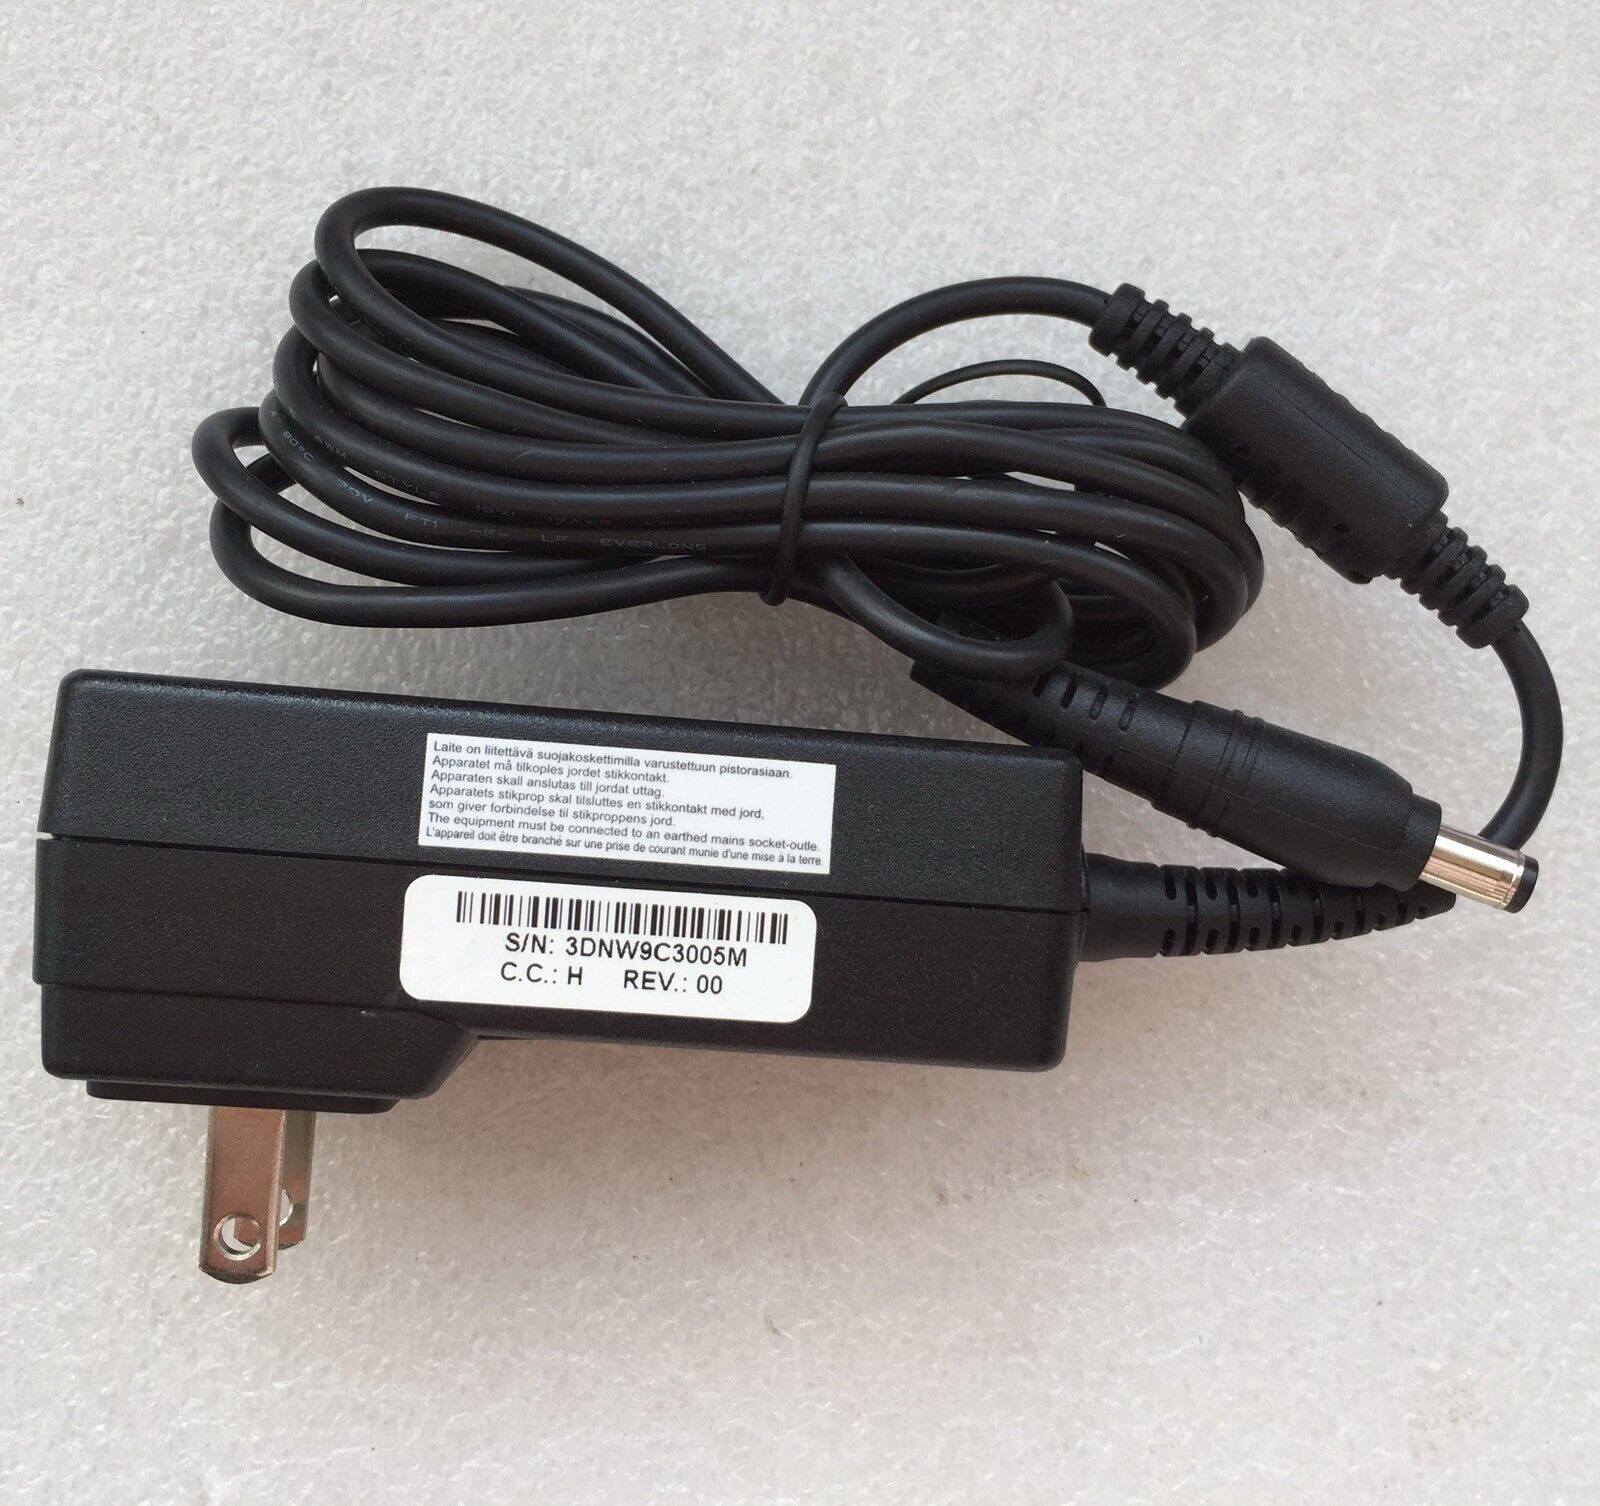 12V AC/DC ADAPTER POWER SUPPLY UK PLUG FOR For HB-DC12V6W / Jump Start Booster Type Power Adapter Compatible Brand Univ